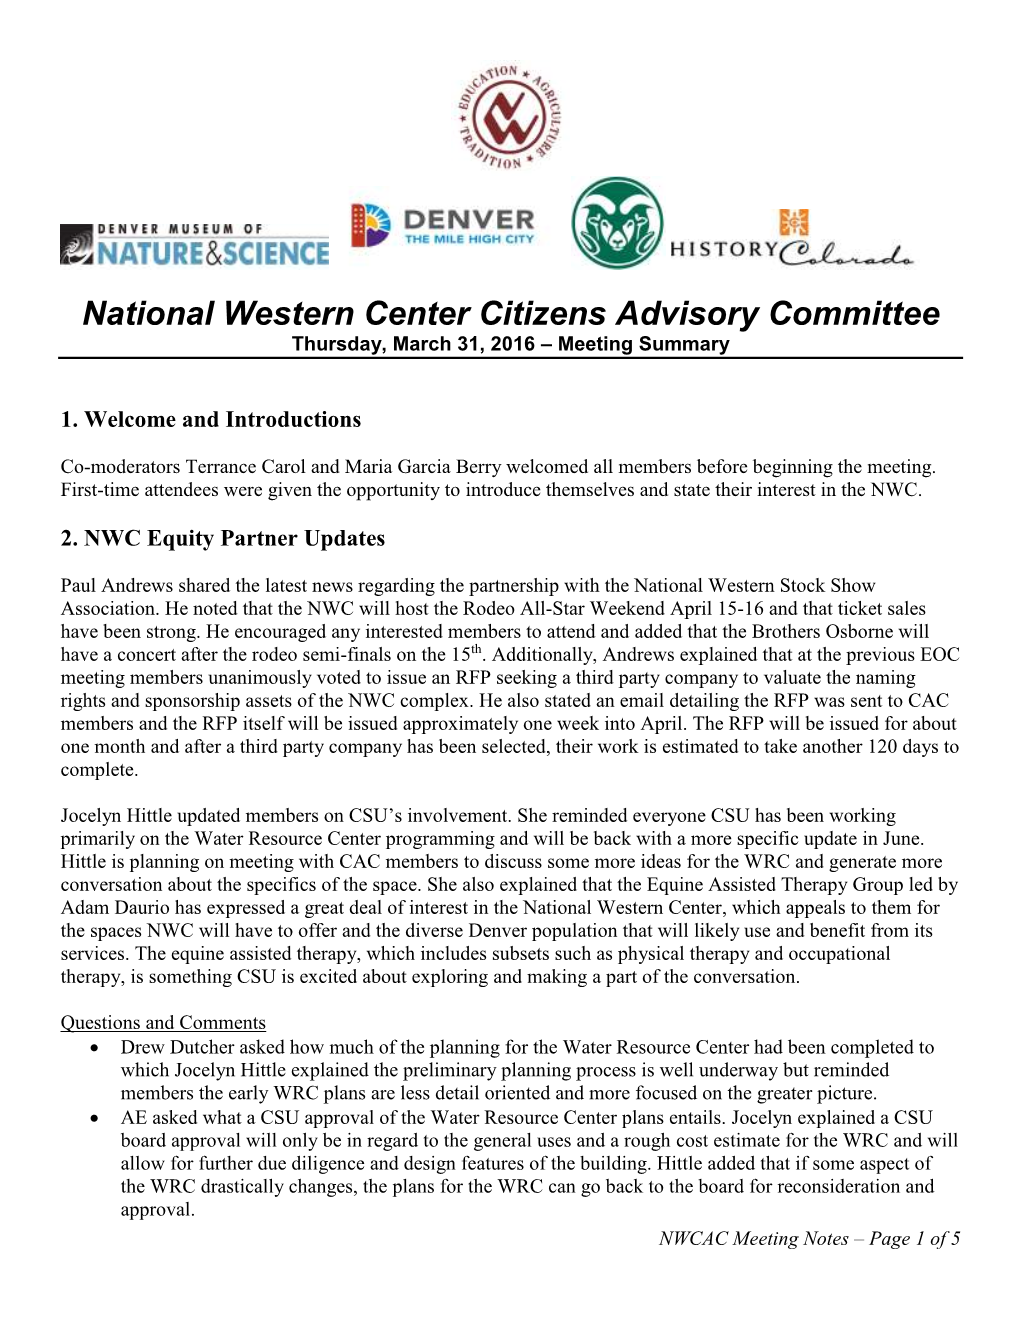 National Western Center Citizens Advisory Committee Thursday, March 31, 2016 – Meeting Summary